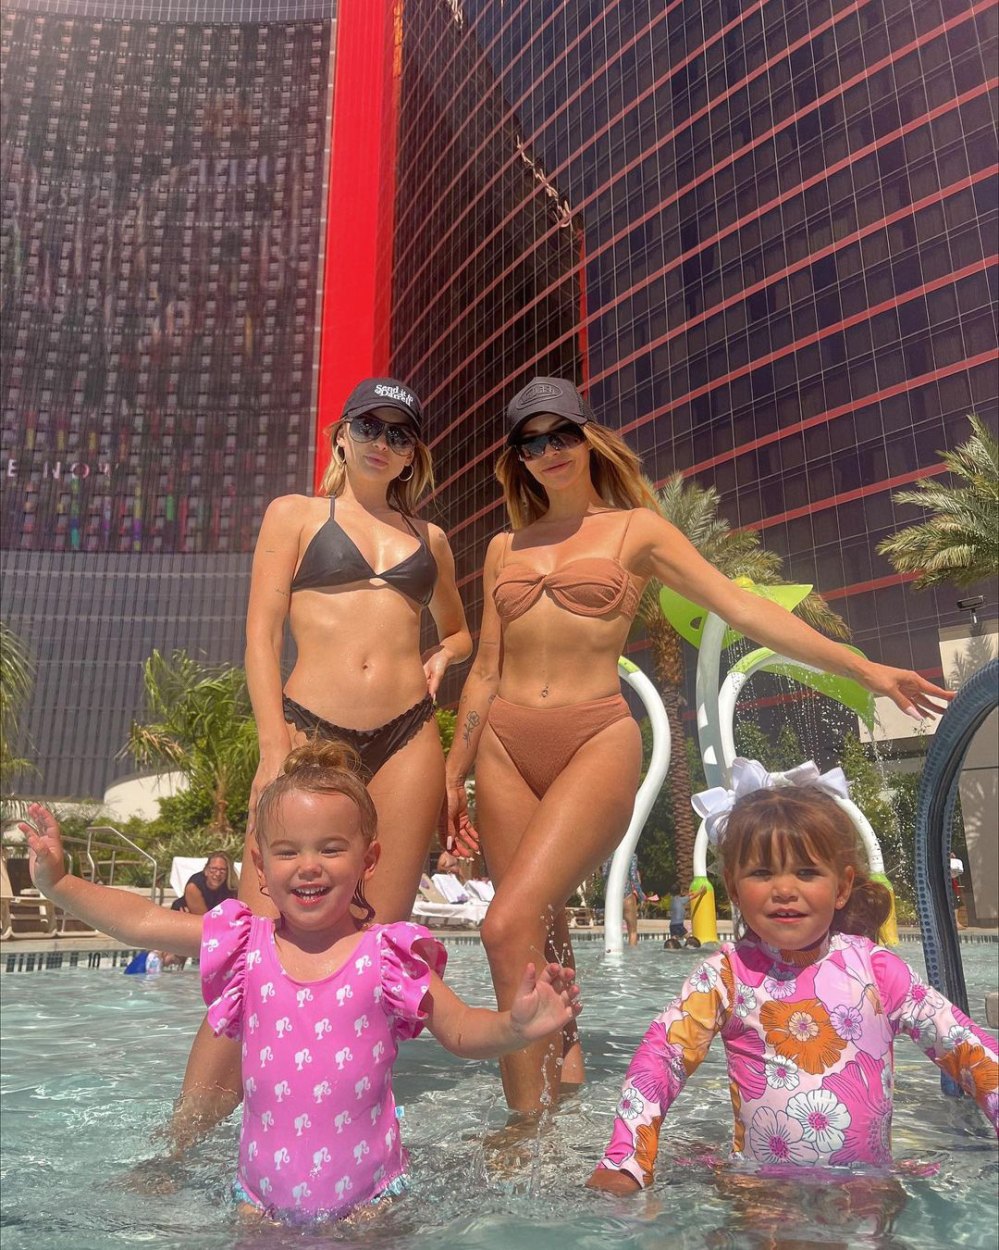 Lala Kent and Scheana Shay's Girls Trip Look a 'Little Different' With Their Kids — But Just as Fun